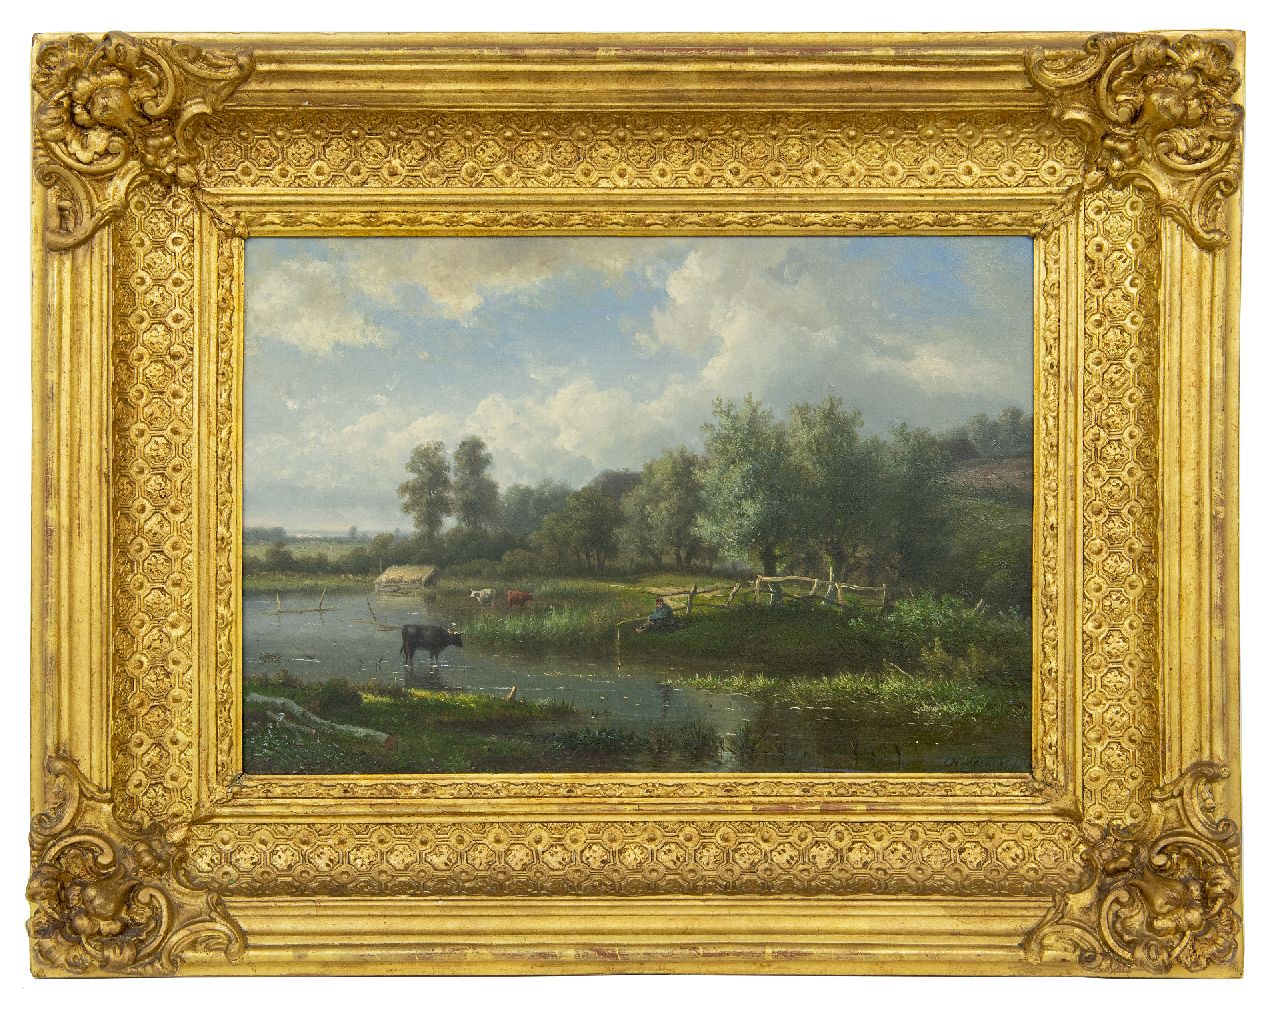 Meiners C.H.  | Claas Hendrik Meiners | Paintings offered for sale | In the floodplains near Oosterbeek, oil on canvas 36.6 x 53.0 cm, signed l.r. and dated '86